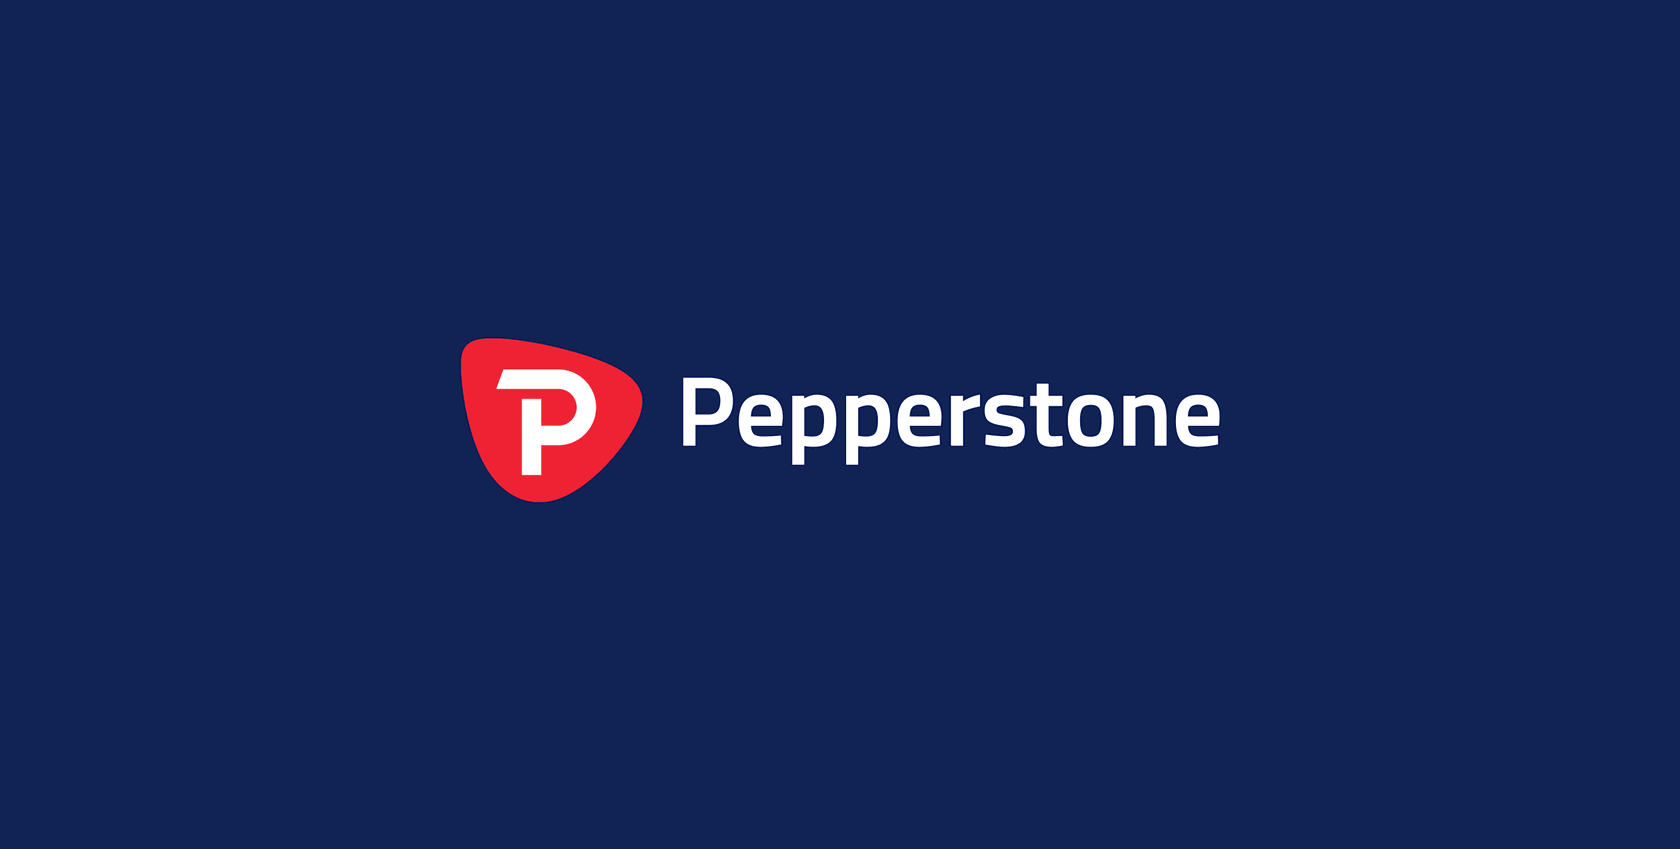 Introducing the Pepperstone ATP Live Rankings